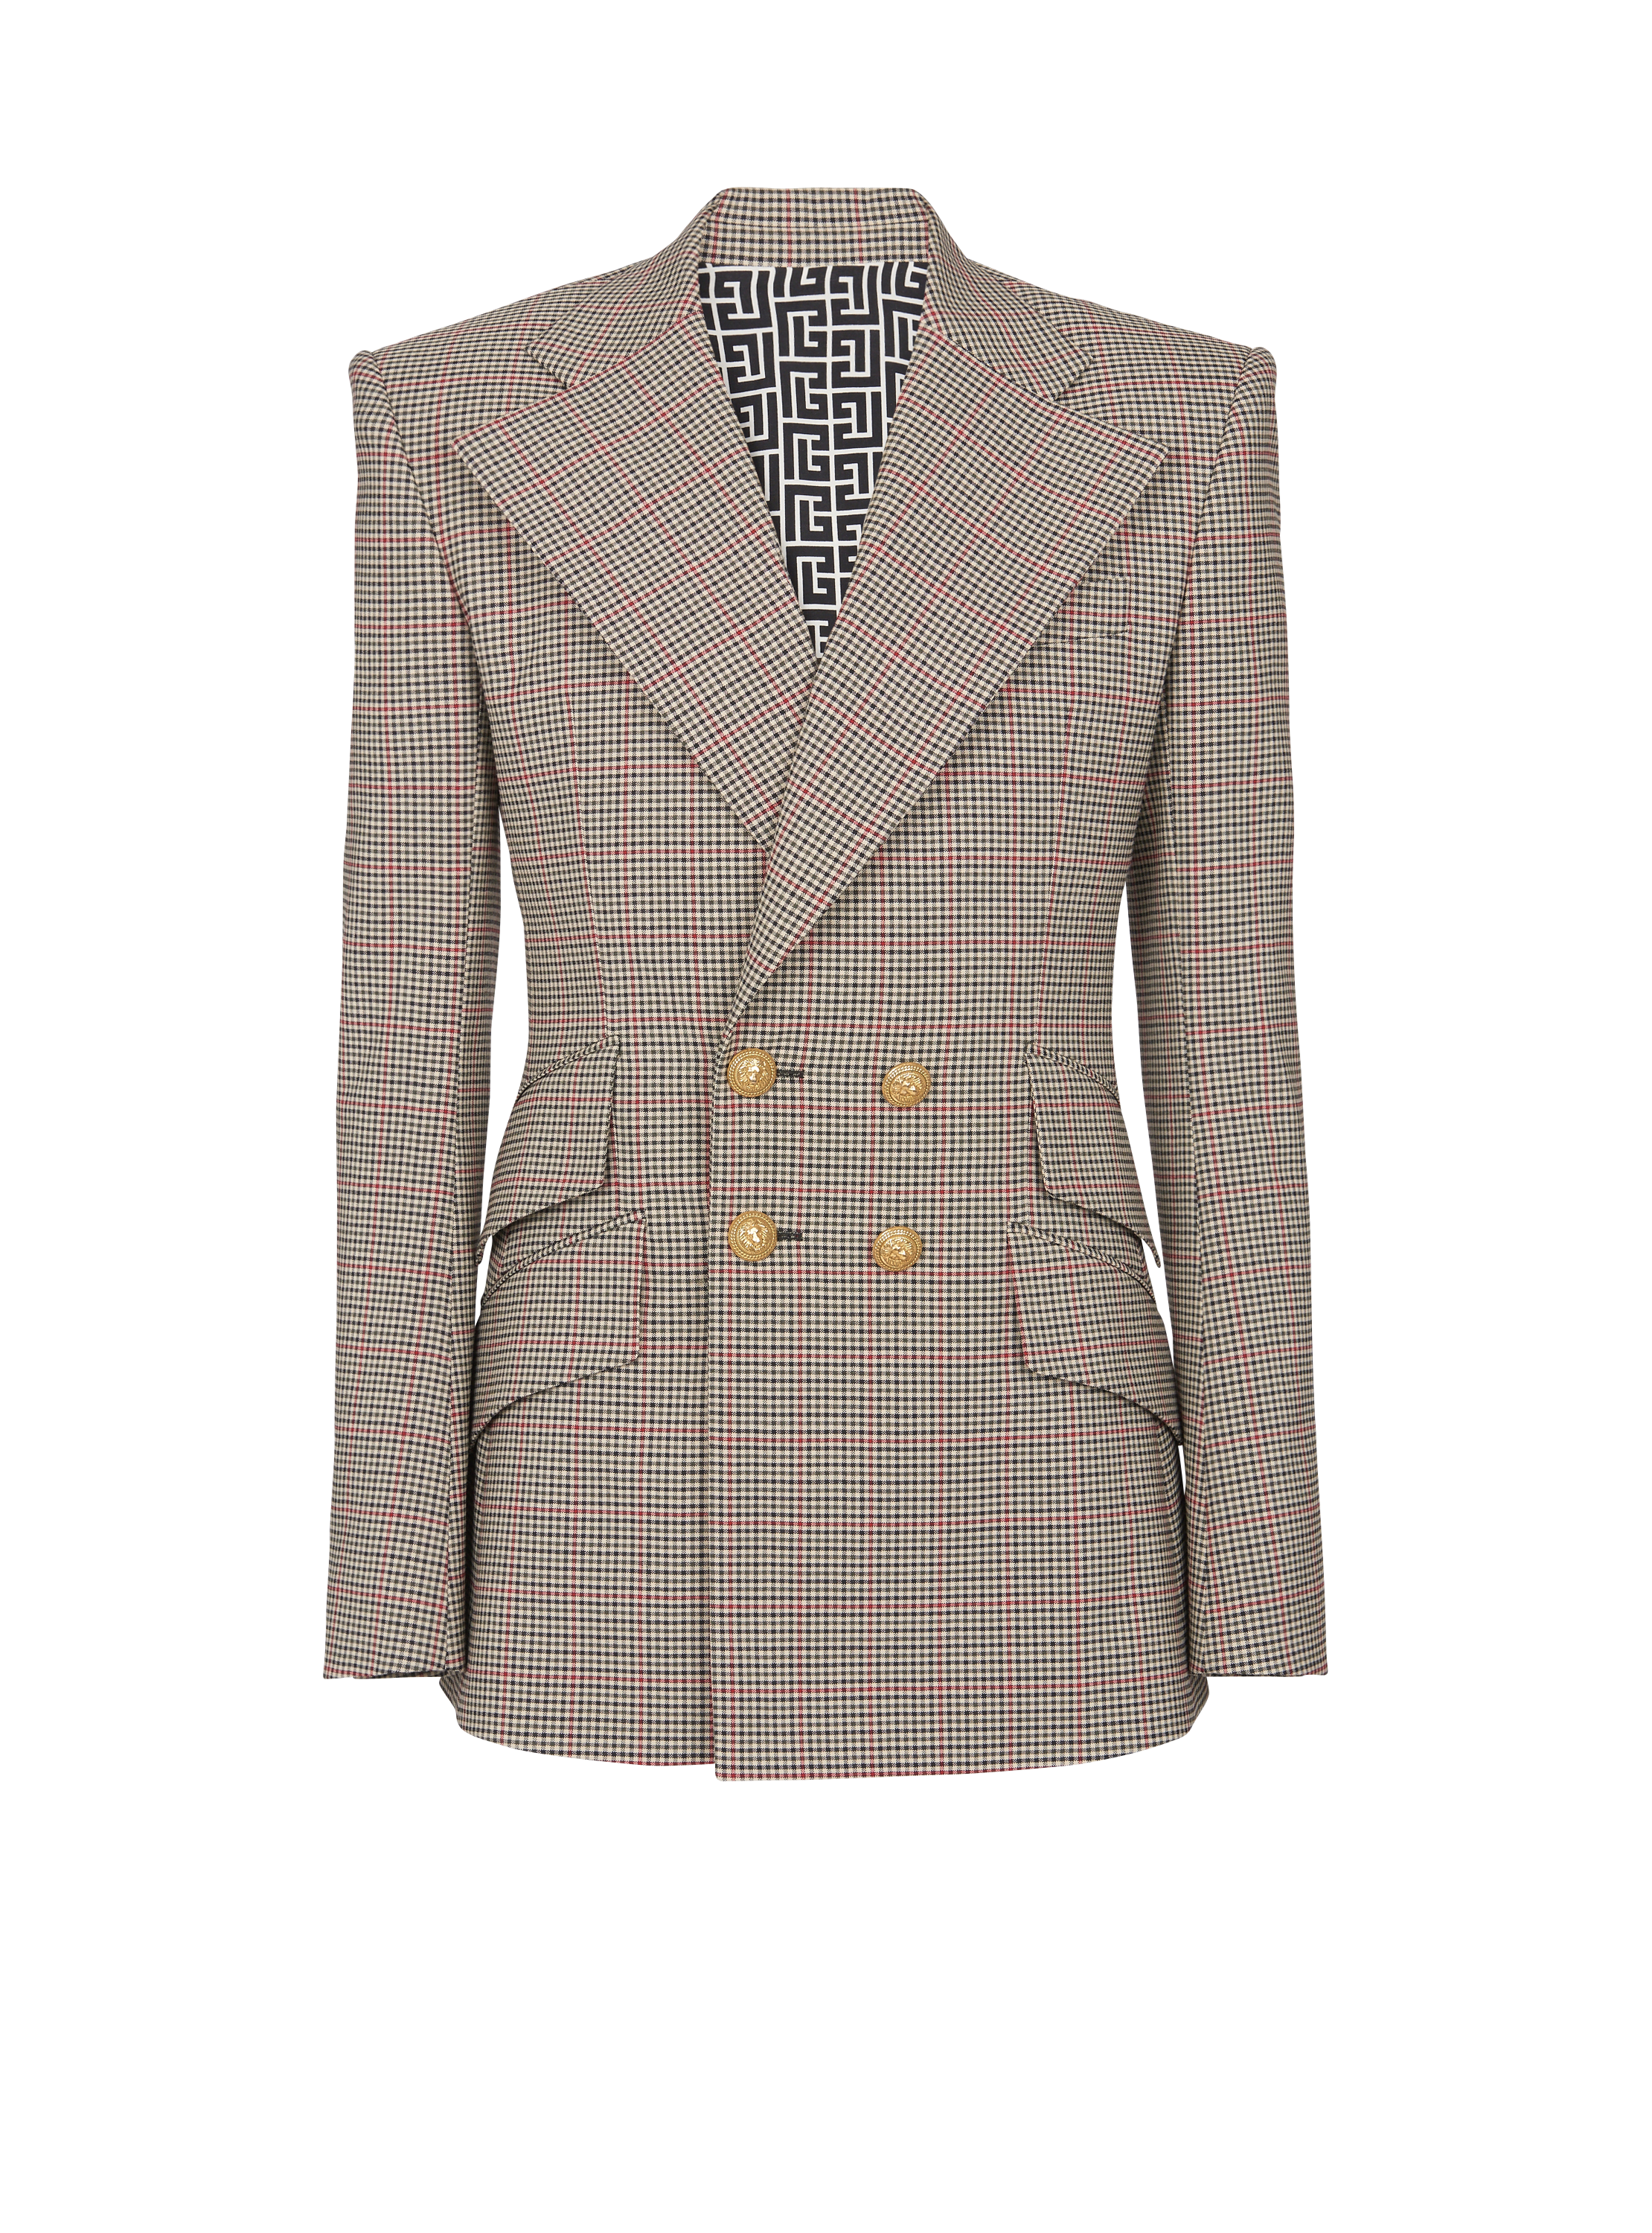 '70s Prince-of-Wales jacket